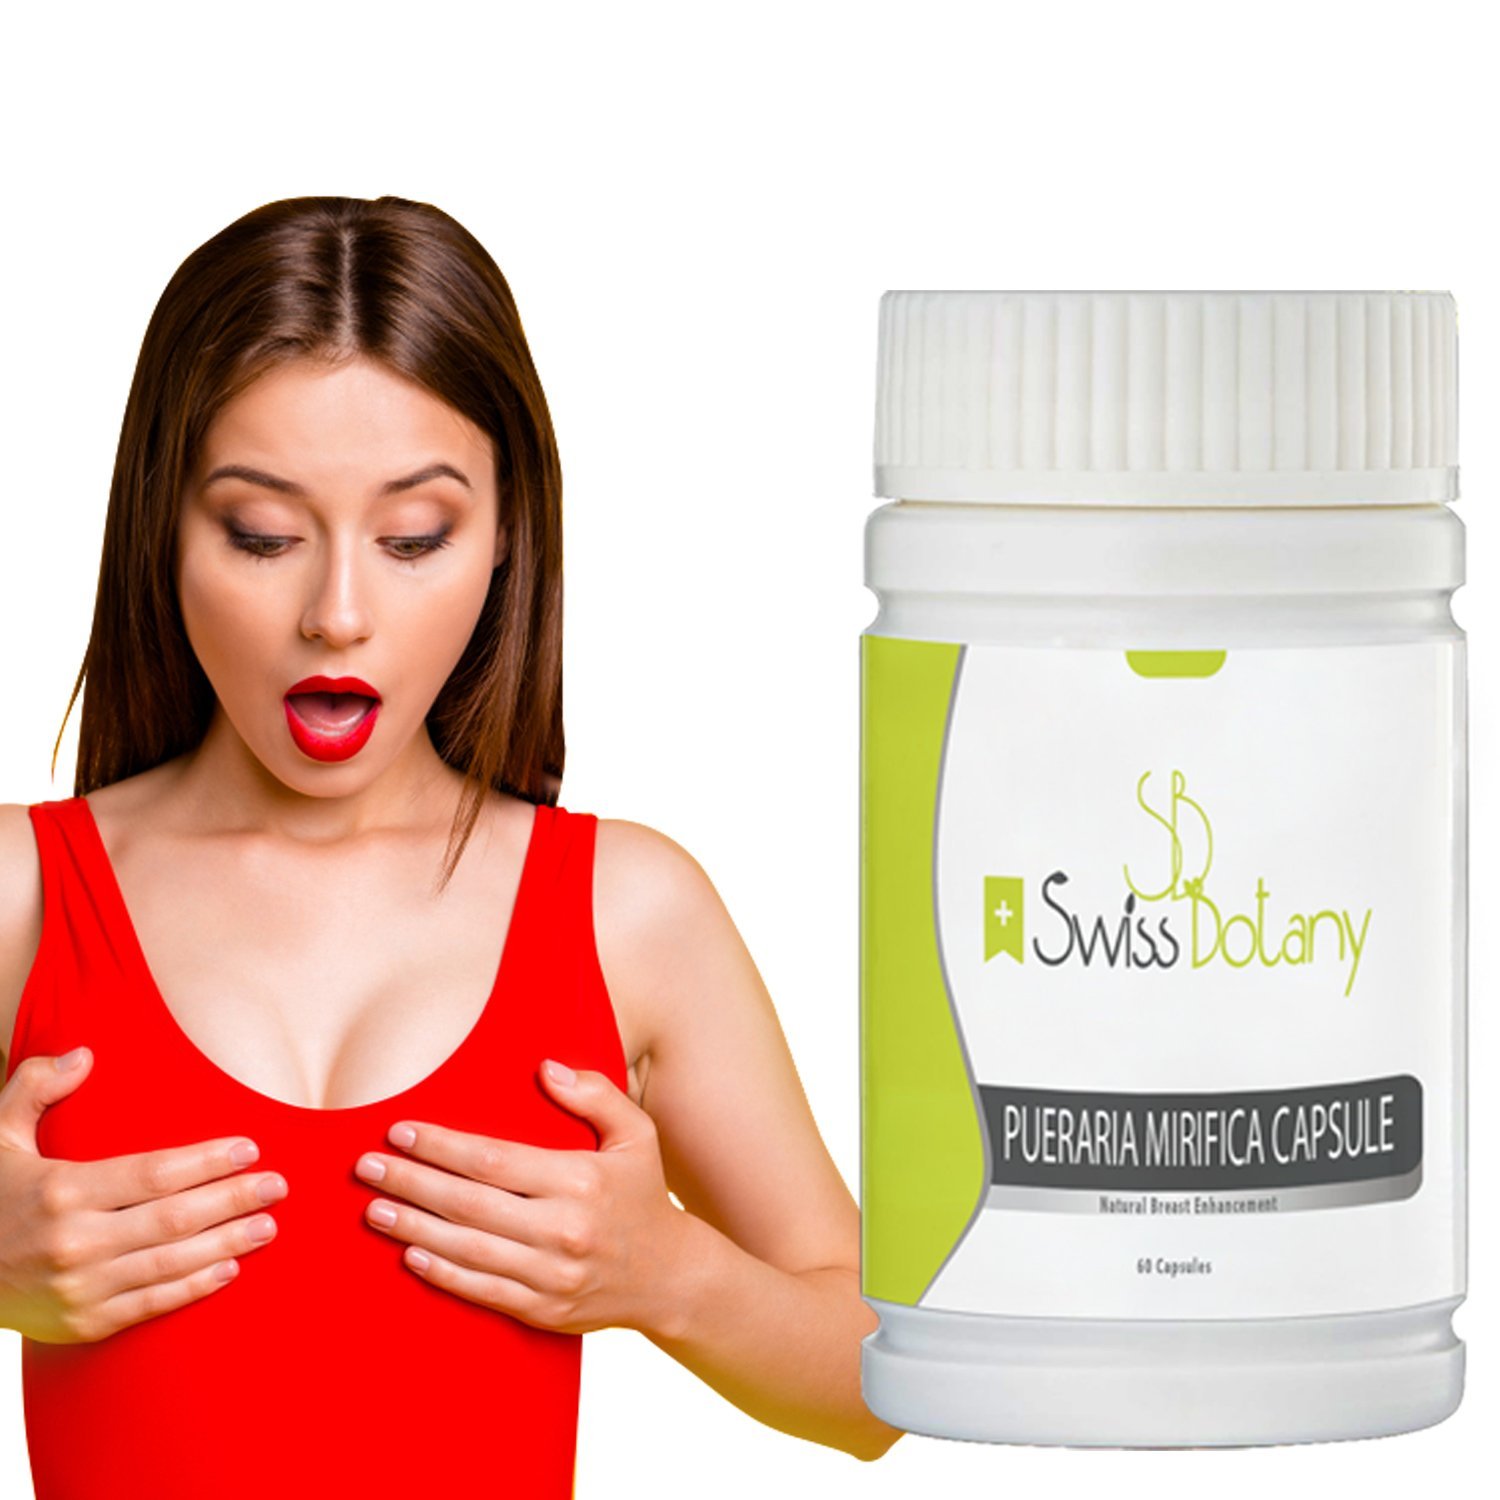 swissbotany: Super-Natural Breast growth with no surgery